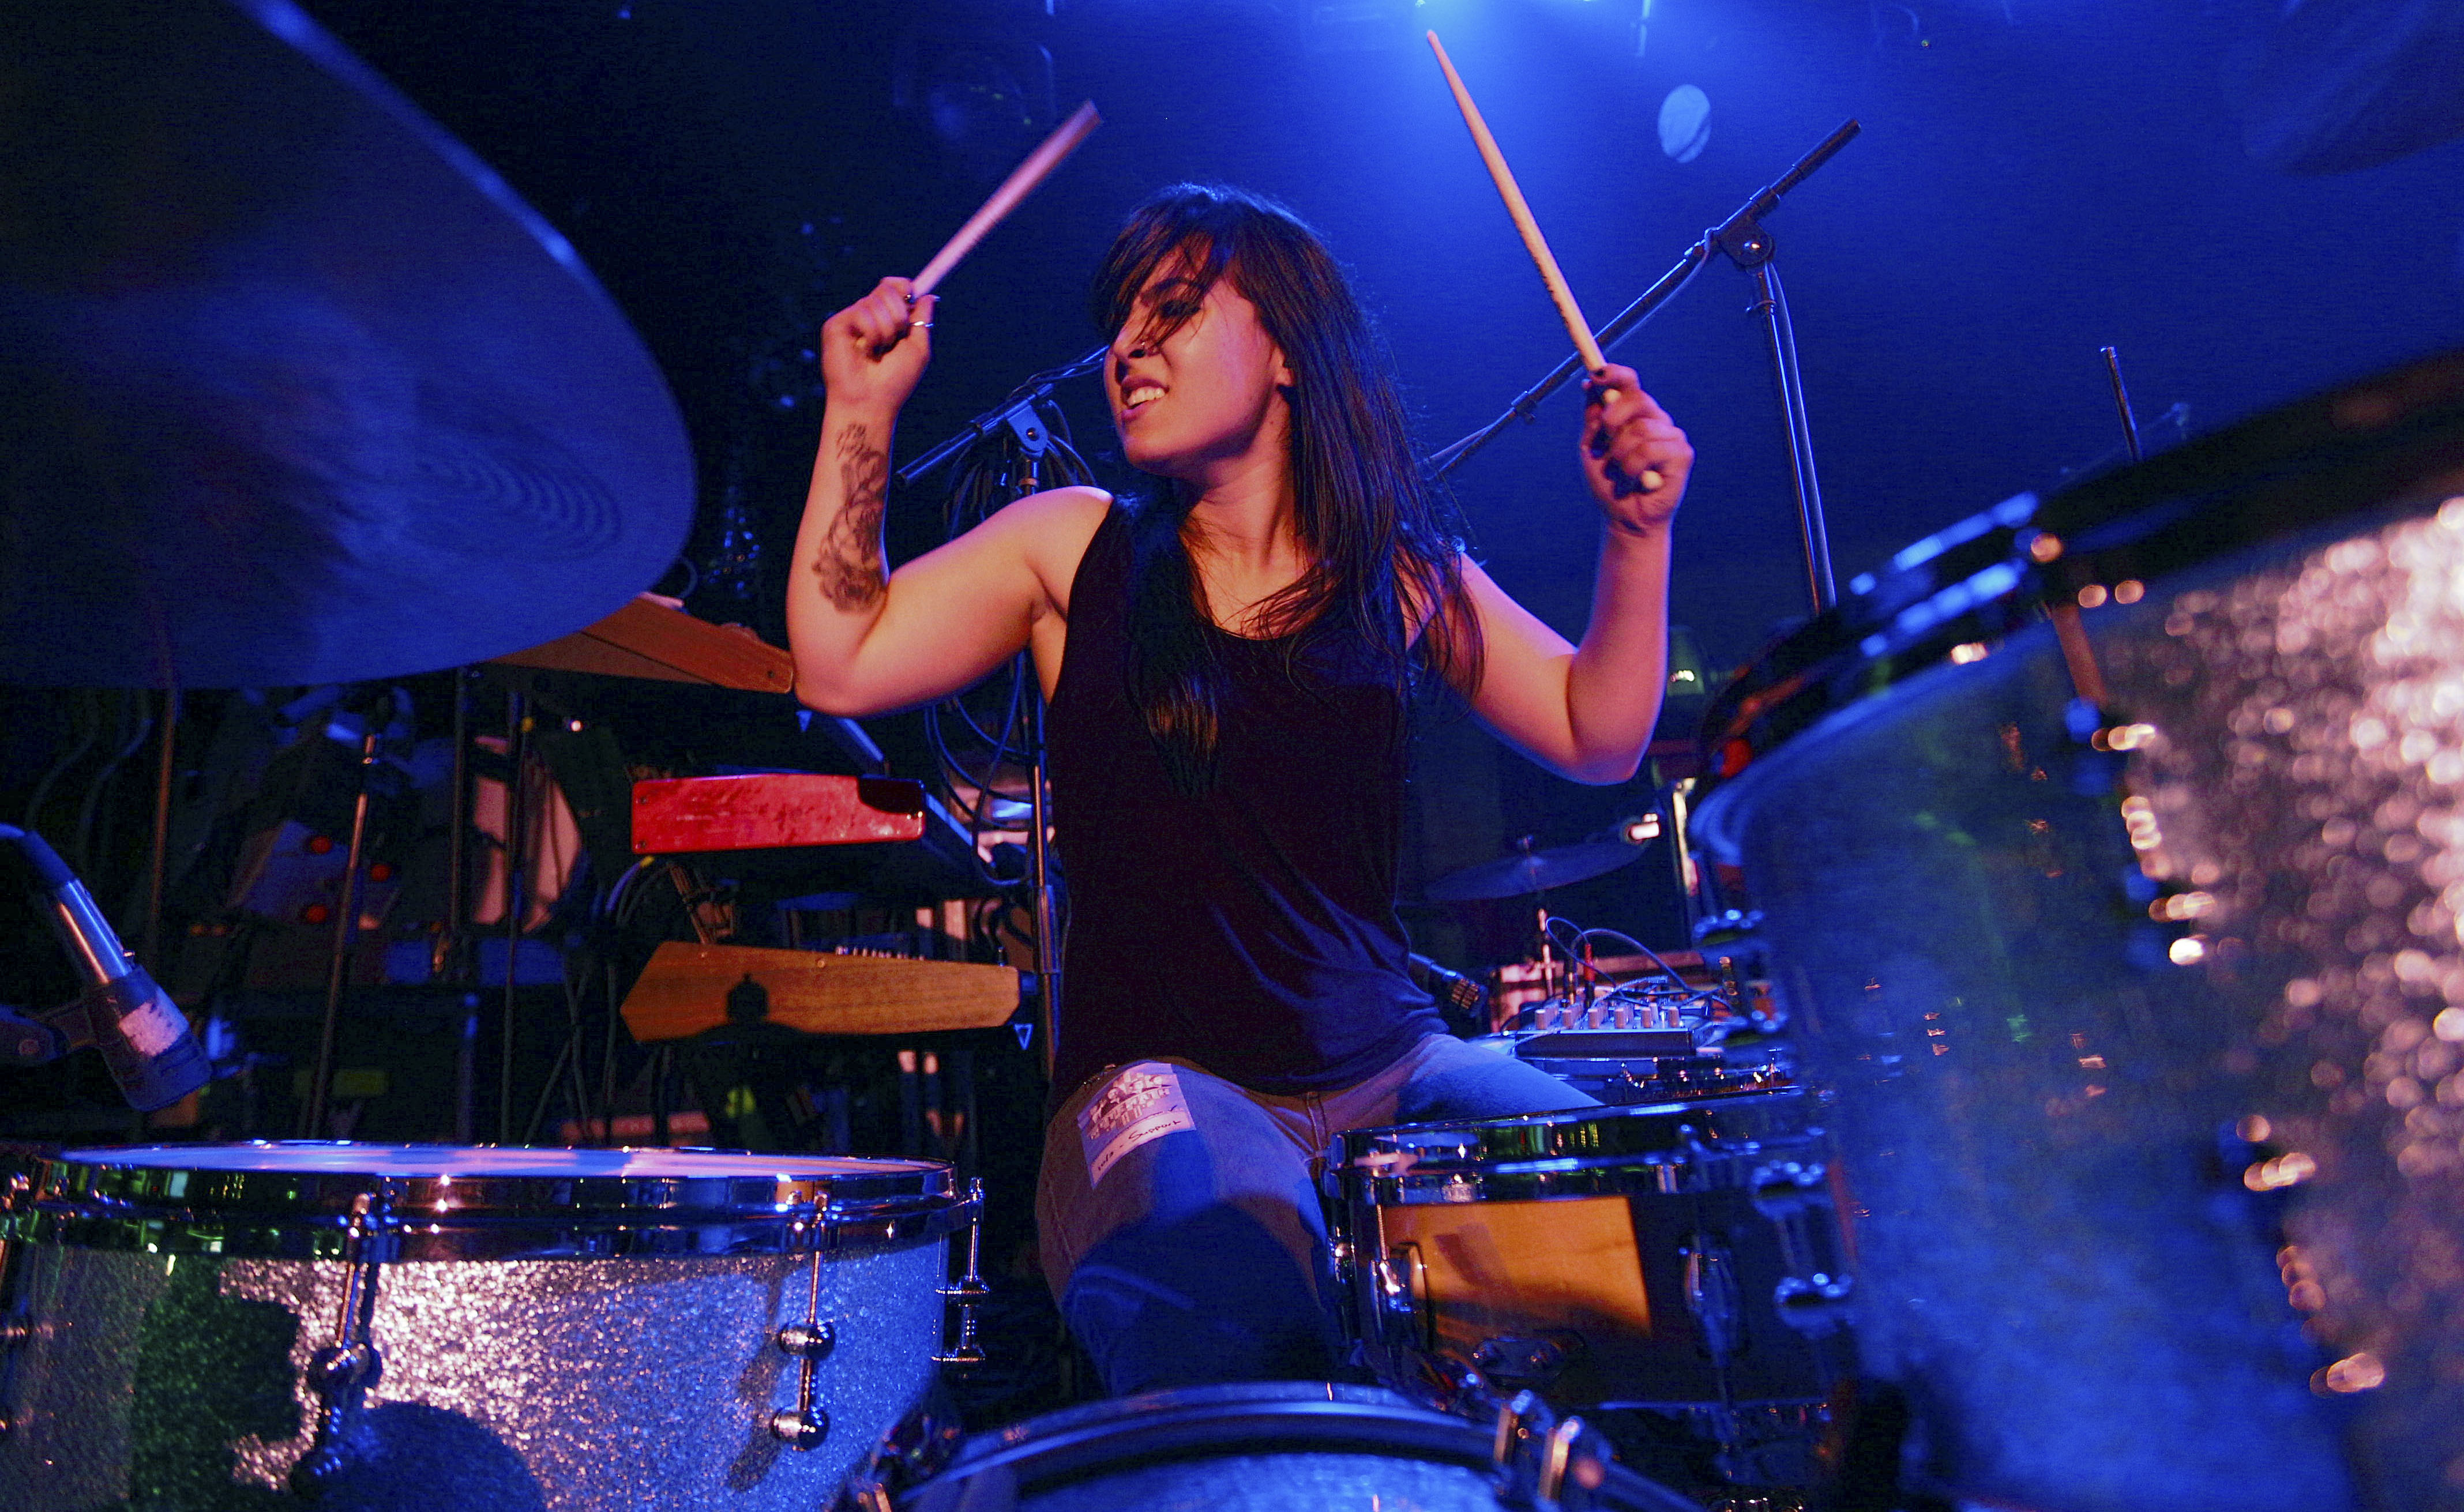 Lesley alum Caitlin Kalafus at her drum set, playing the drums on stage.